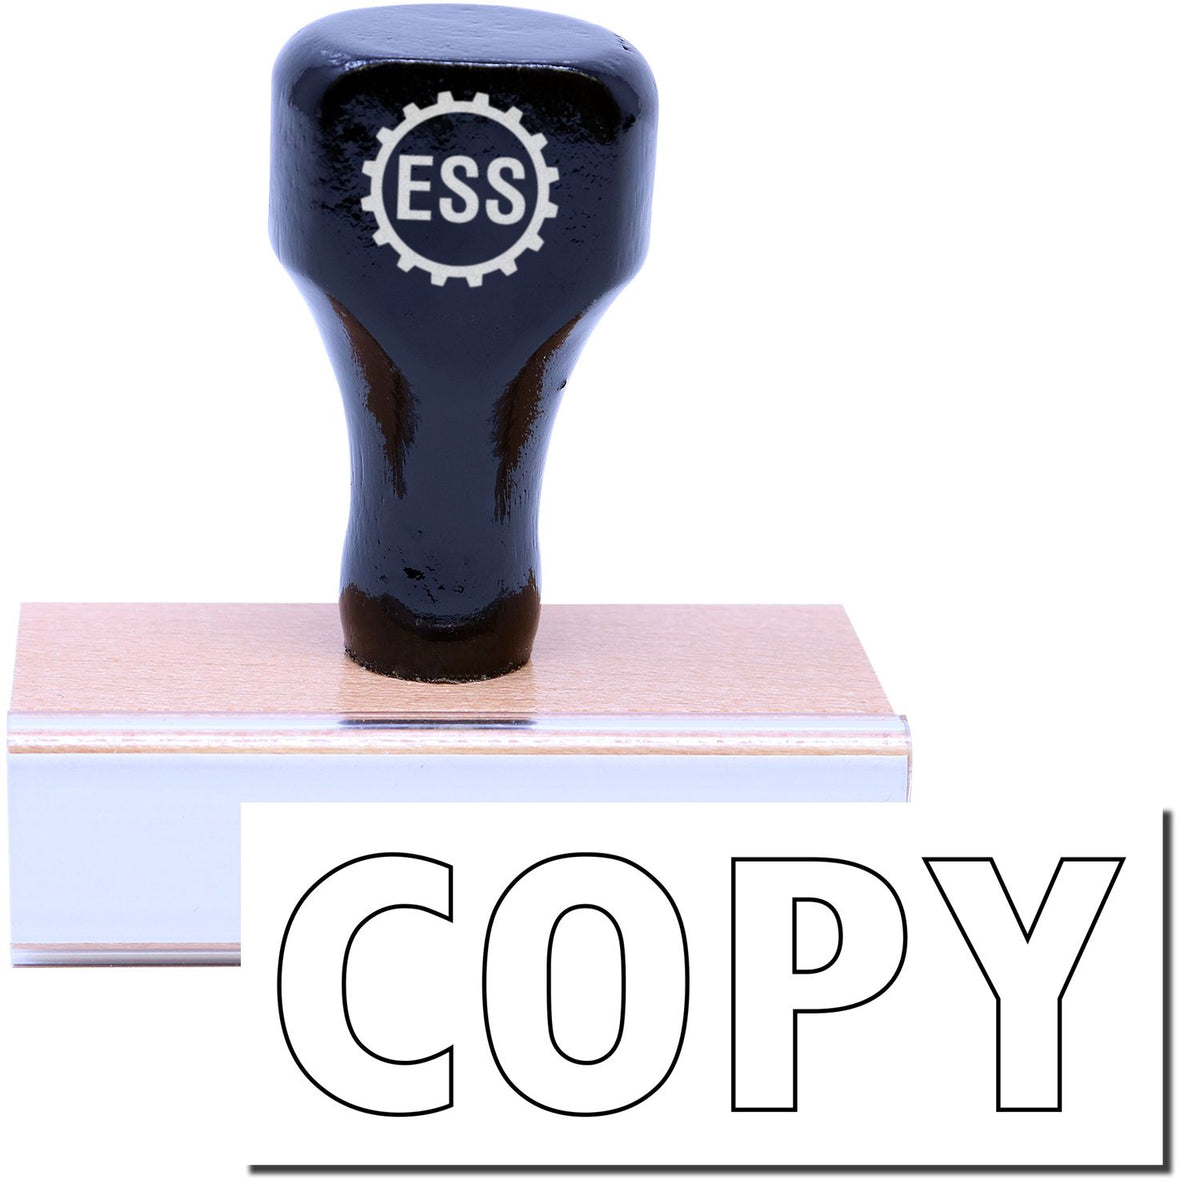 A stock office rubber stamp with a stamped image showing how the text &quot;COPY&quot; in an outline font is displayed after stamping.